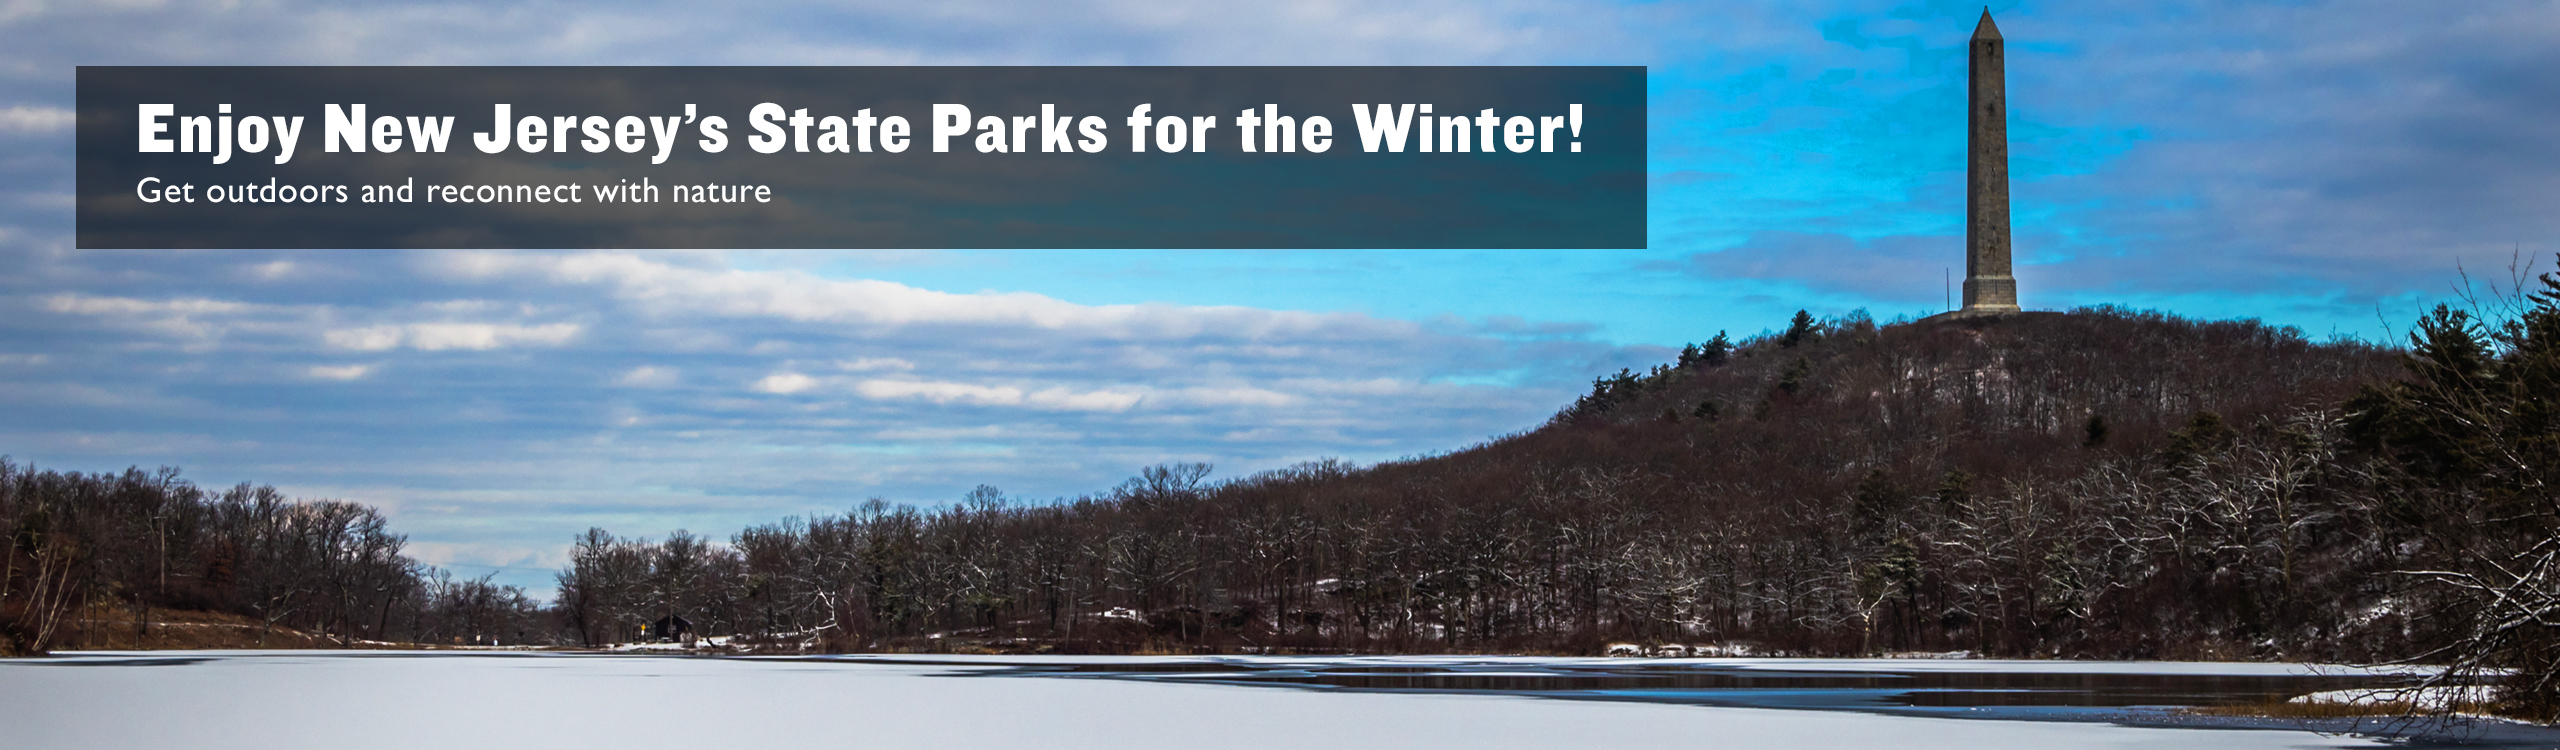 photo: enjoy new jersey state parks at winter